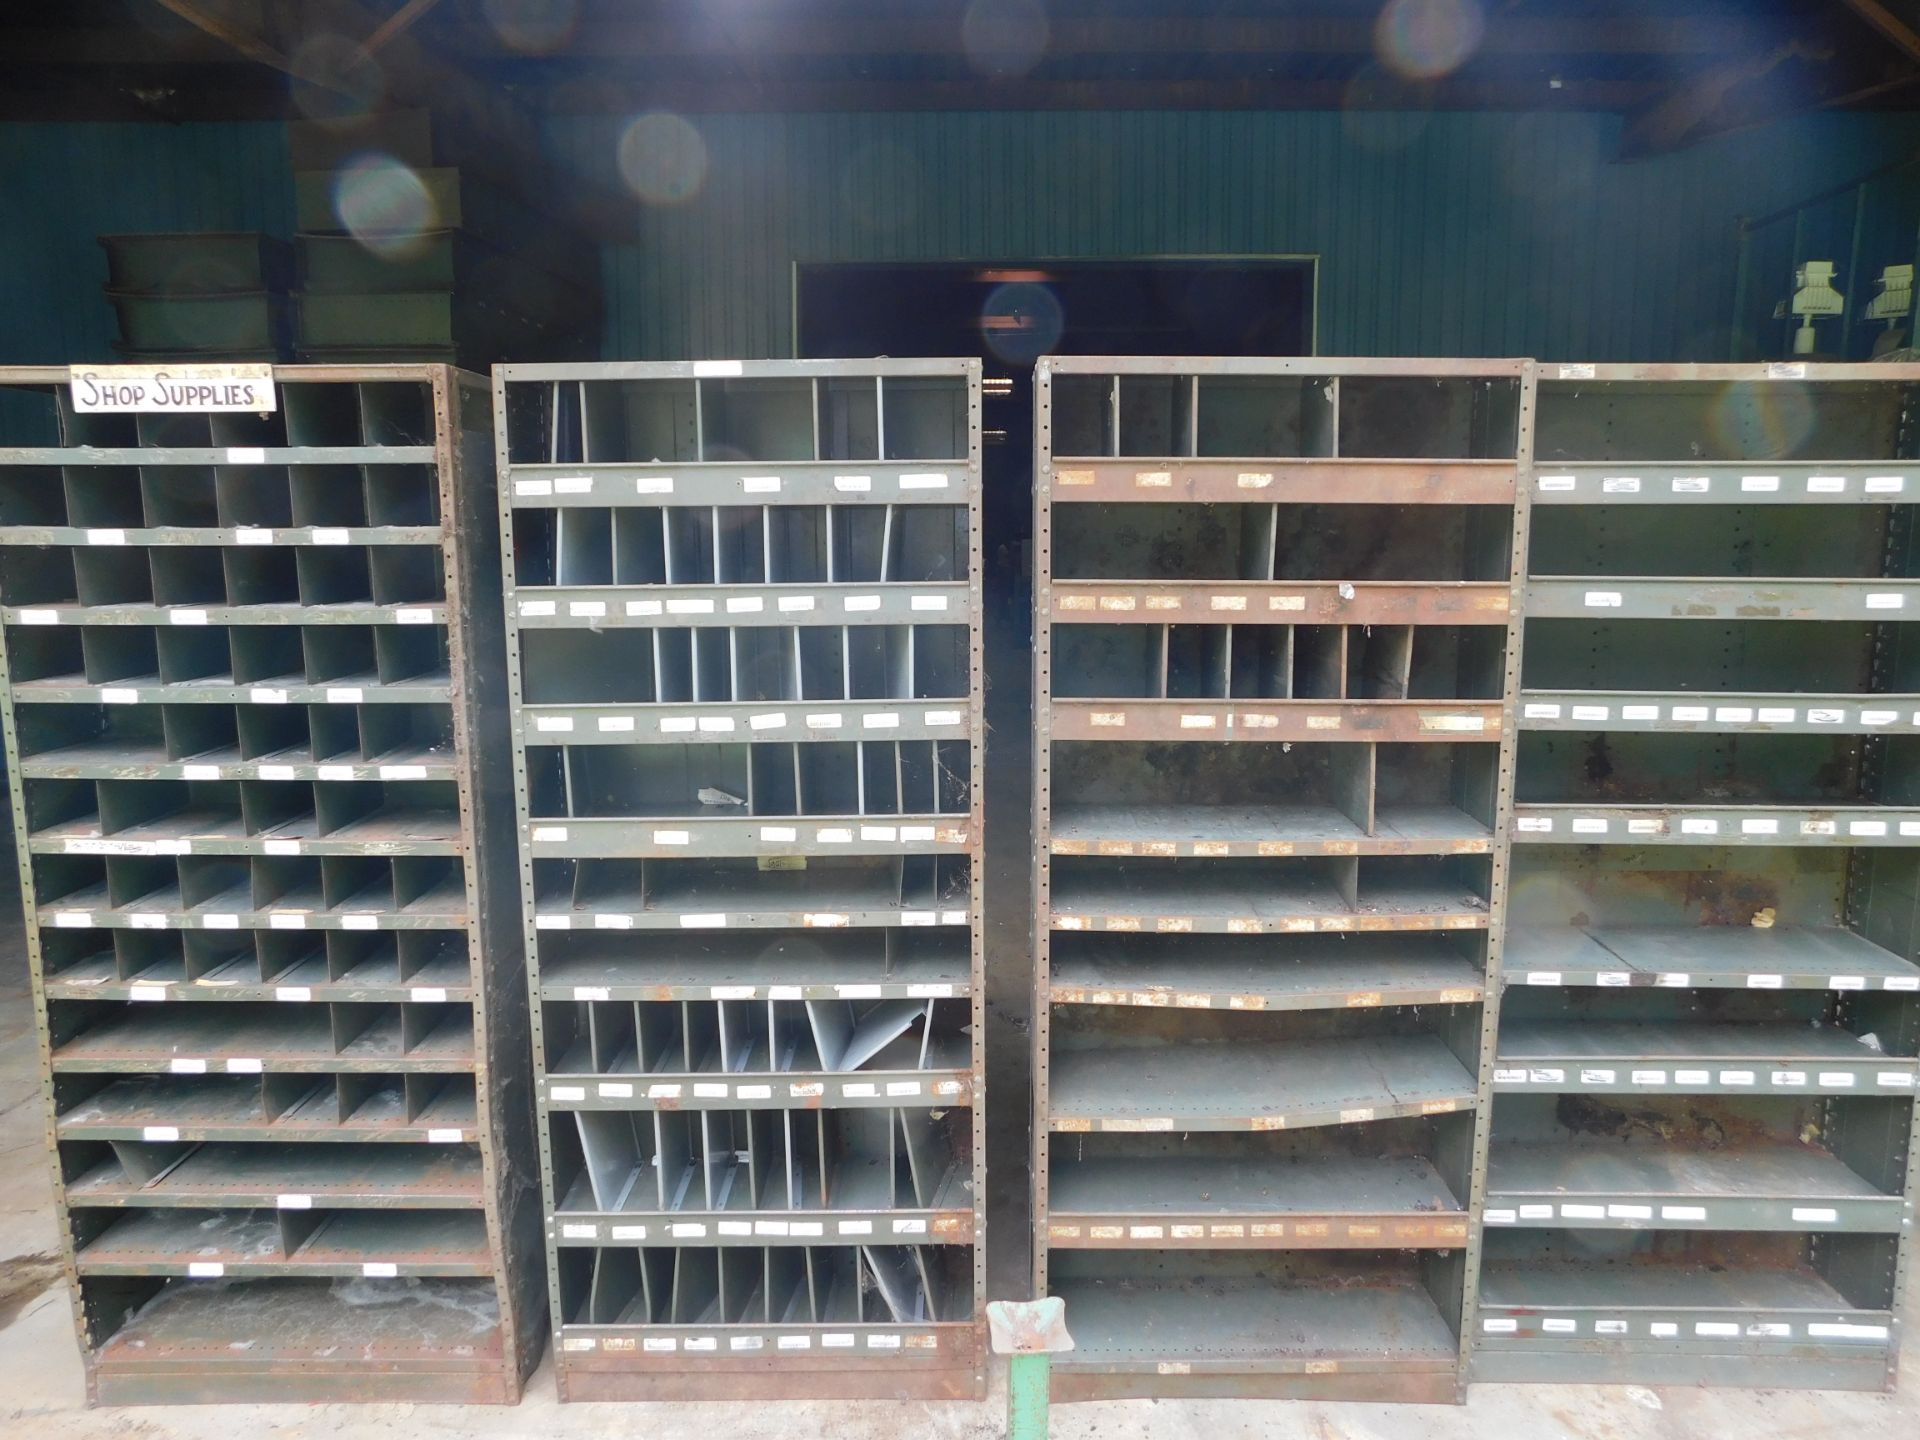 (4) Metal Shelving , Width: 36 1/4 inches, Length: 85 1/4 inches, Height: 12 1/4 inches, 9 Shelves,